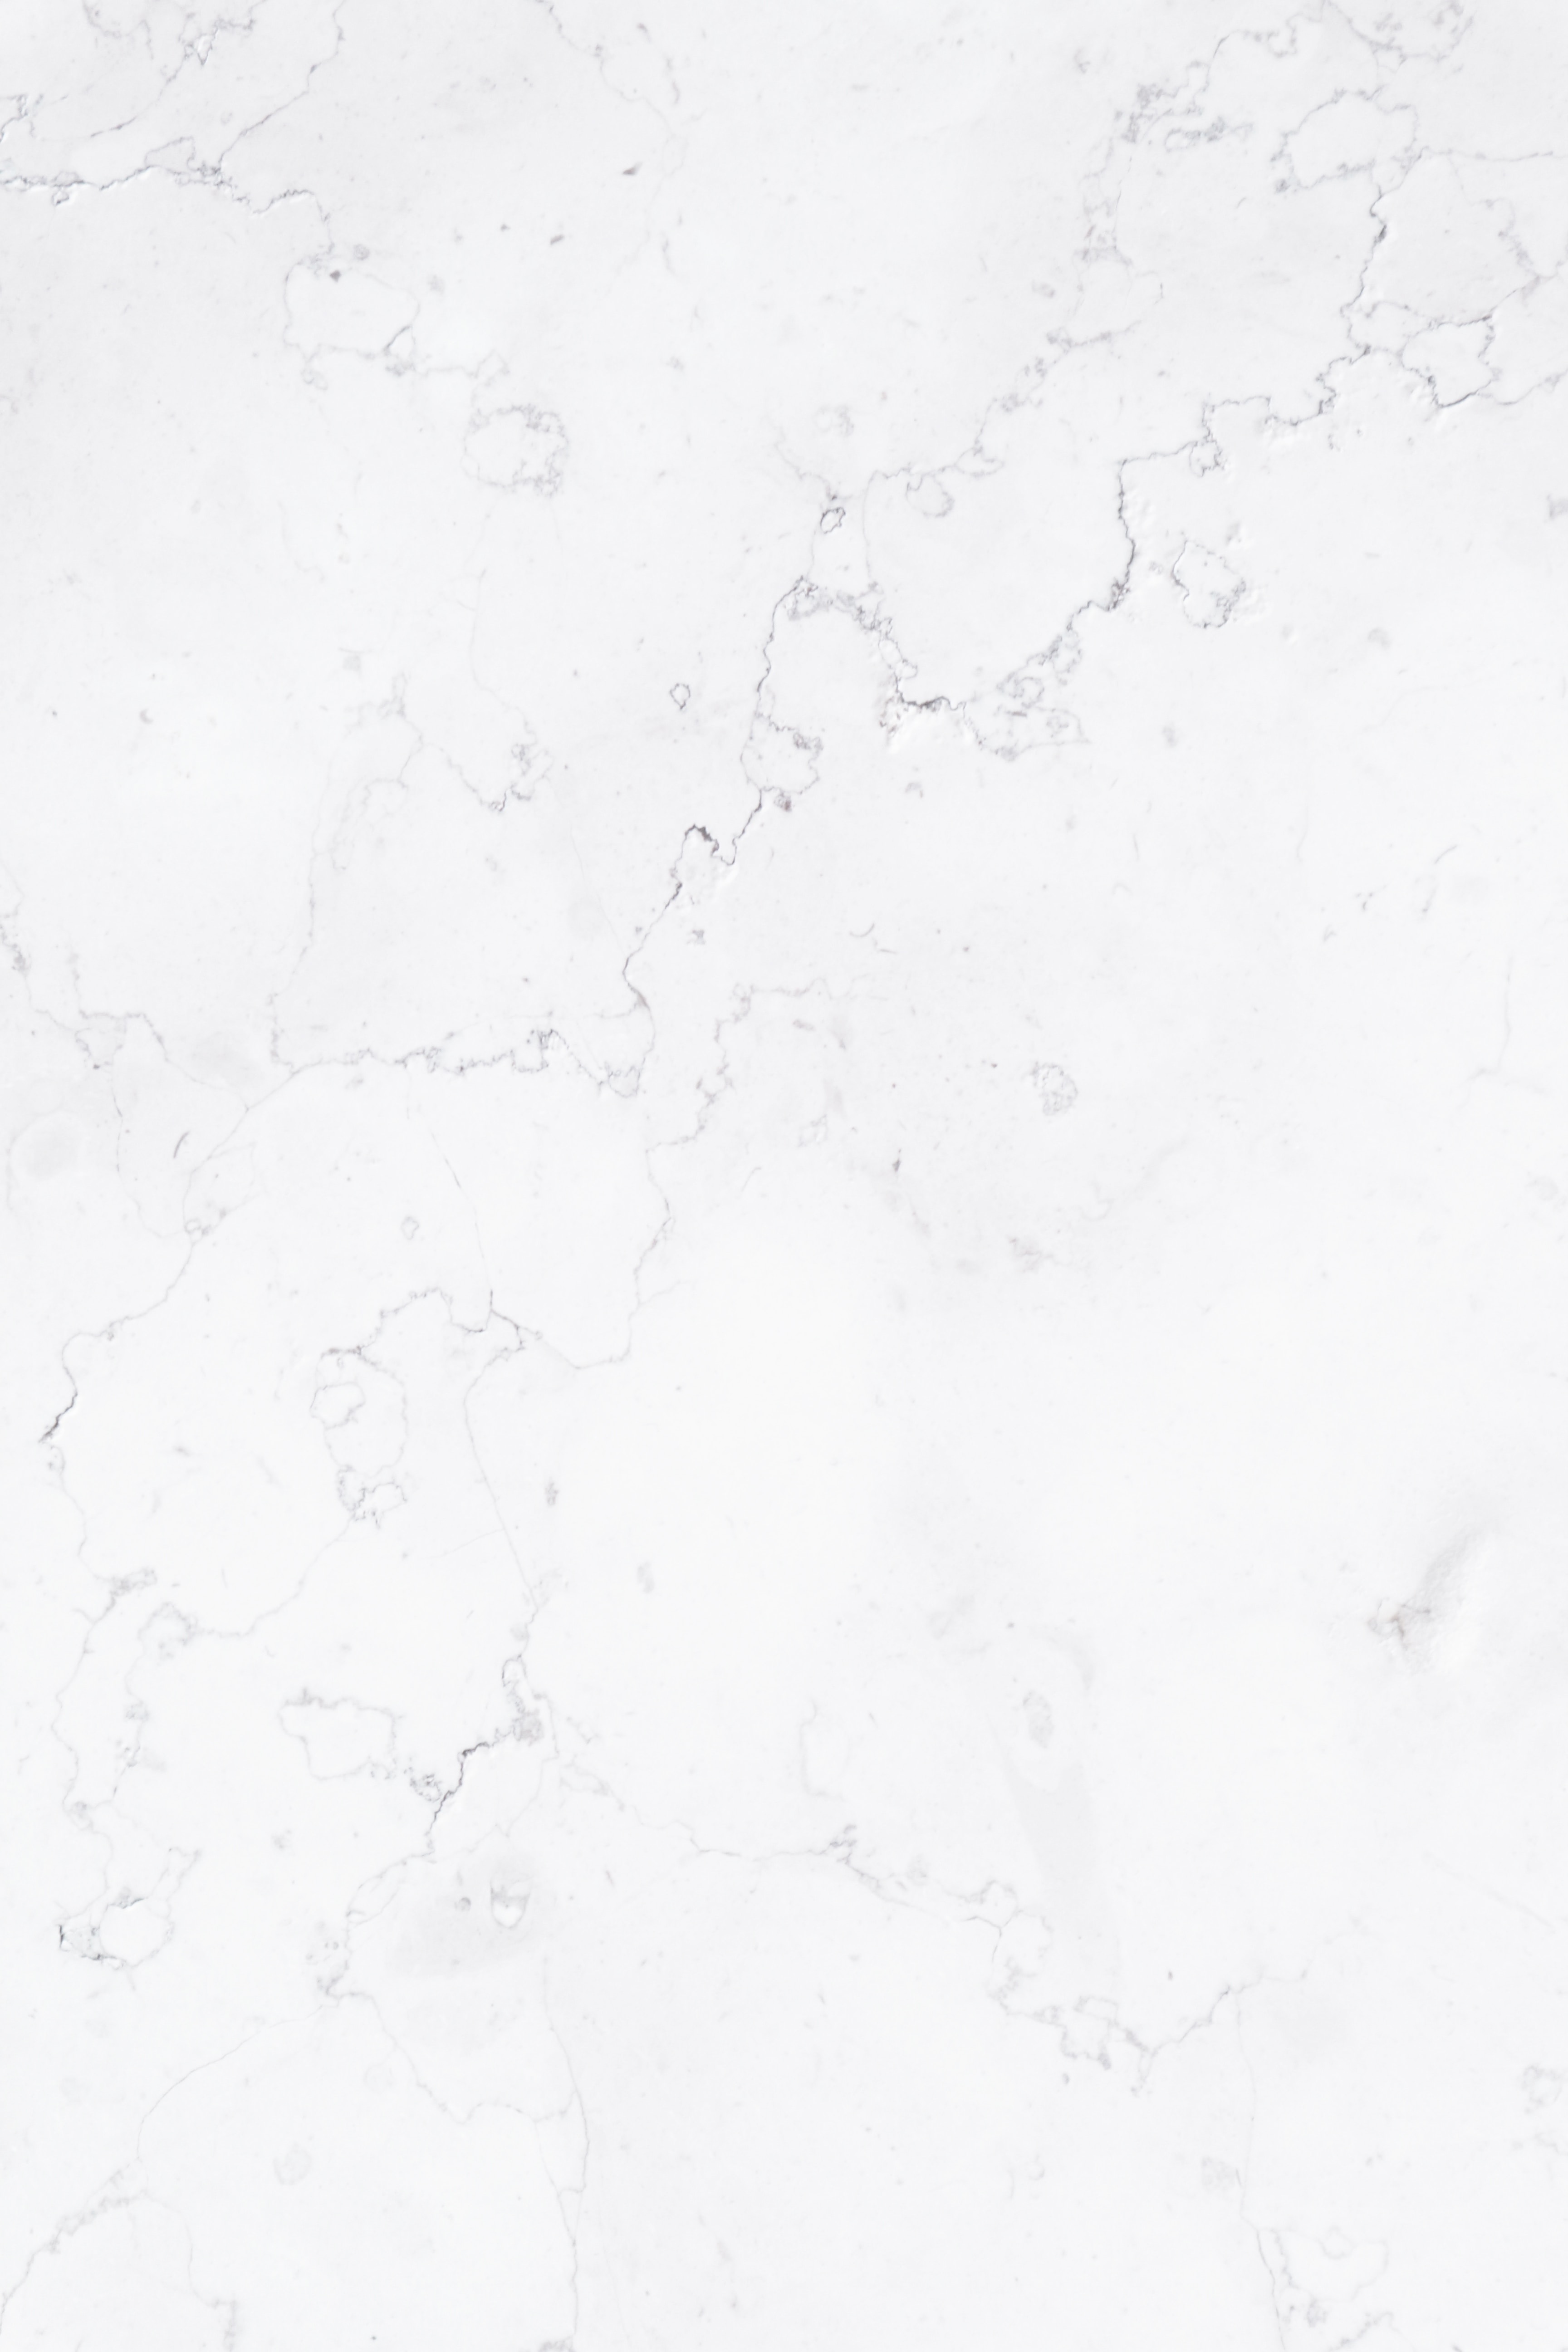 texture, white, textures, marble images